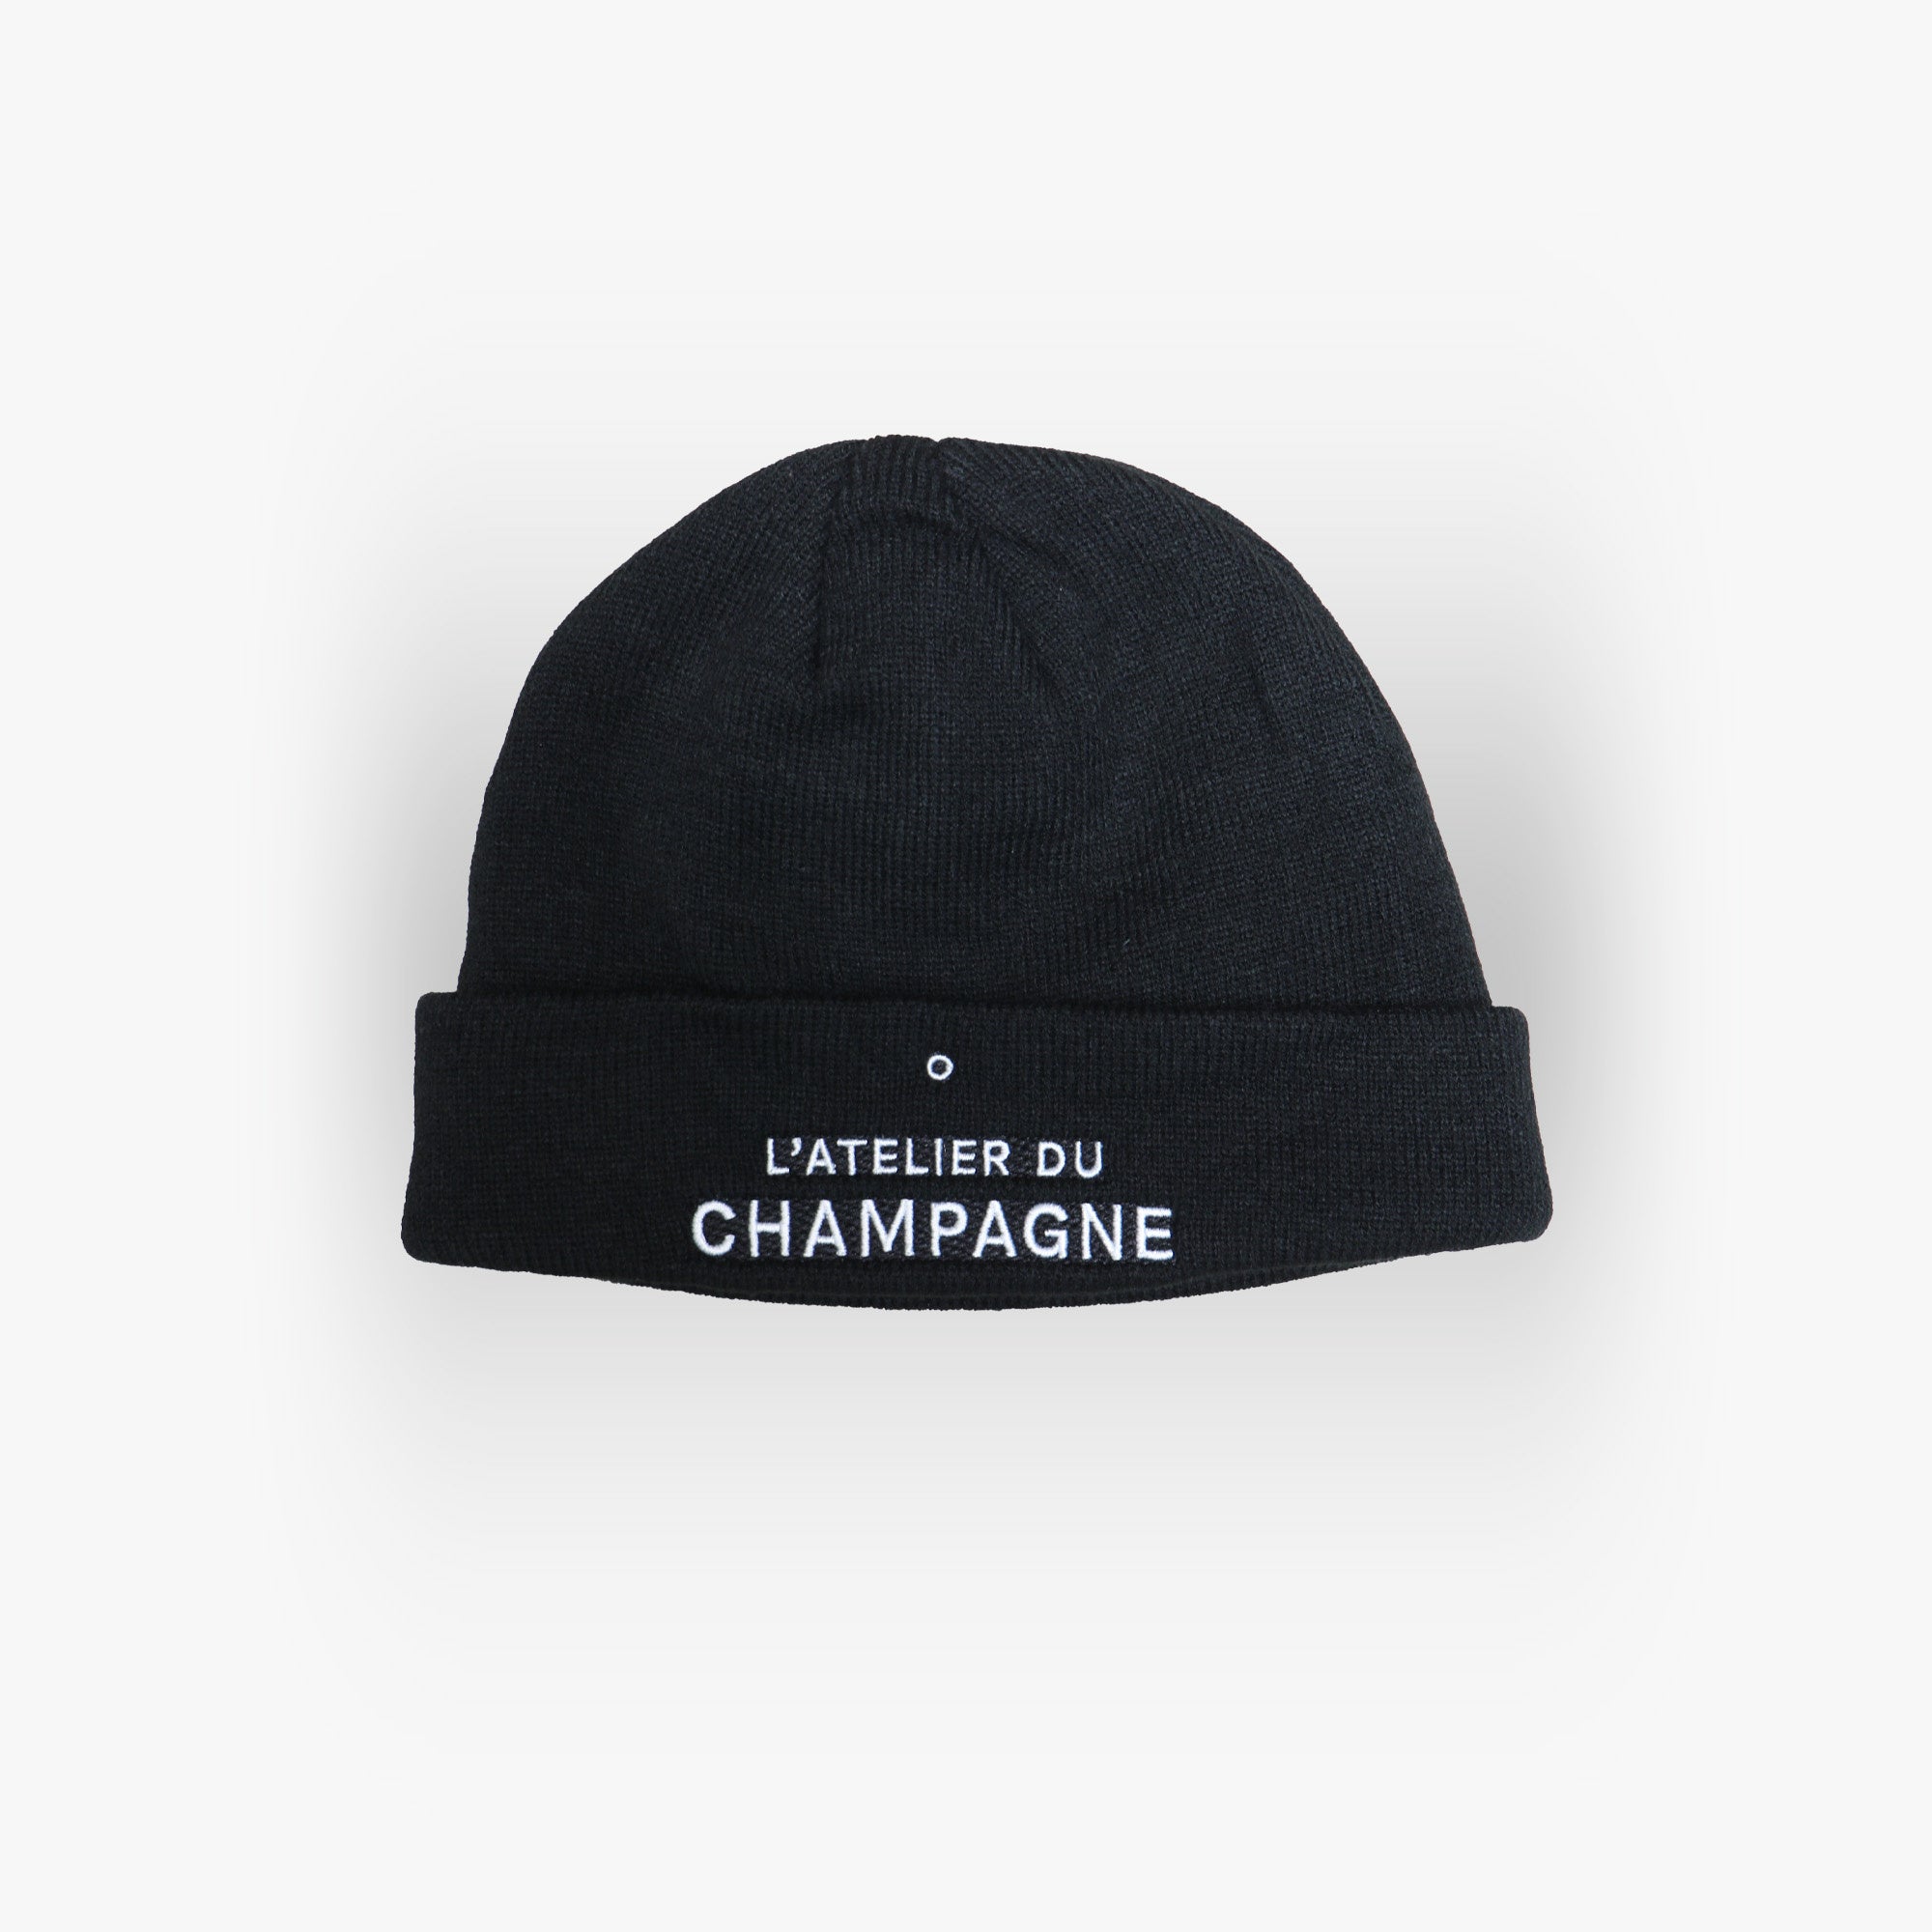 Beanie black (one size fits all)